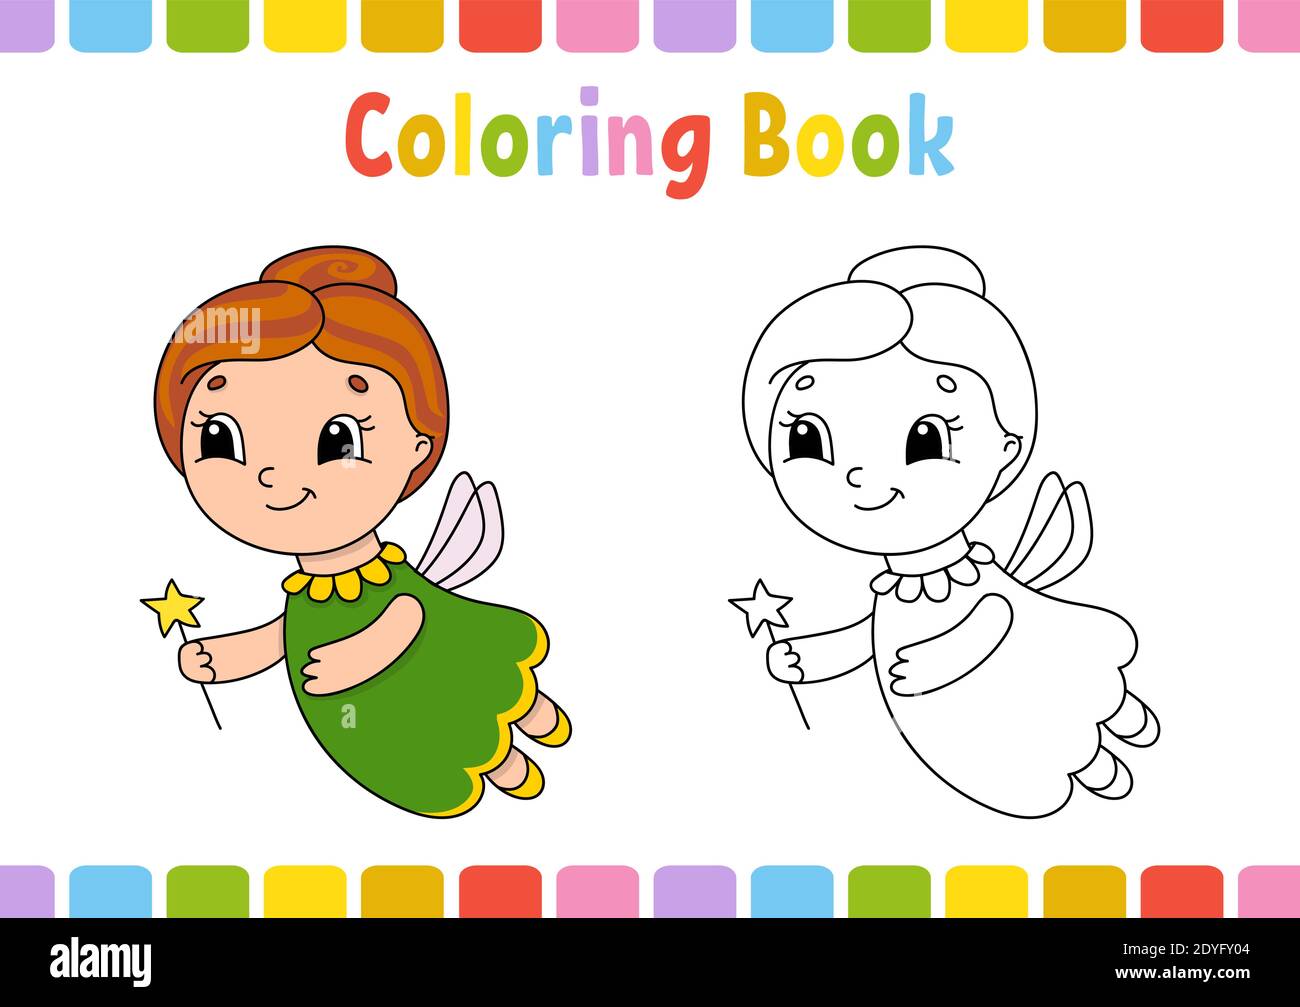 Coloring book for kids. Cheerful character. Simple flat isolated vector illustration in cute cartoon style Stock Vector